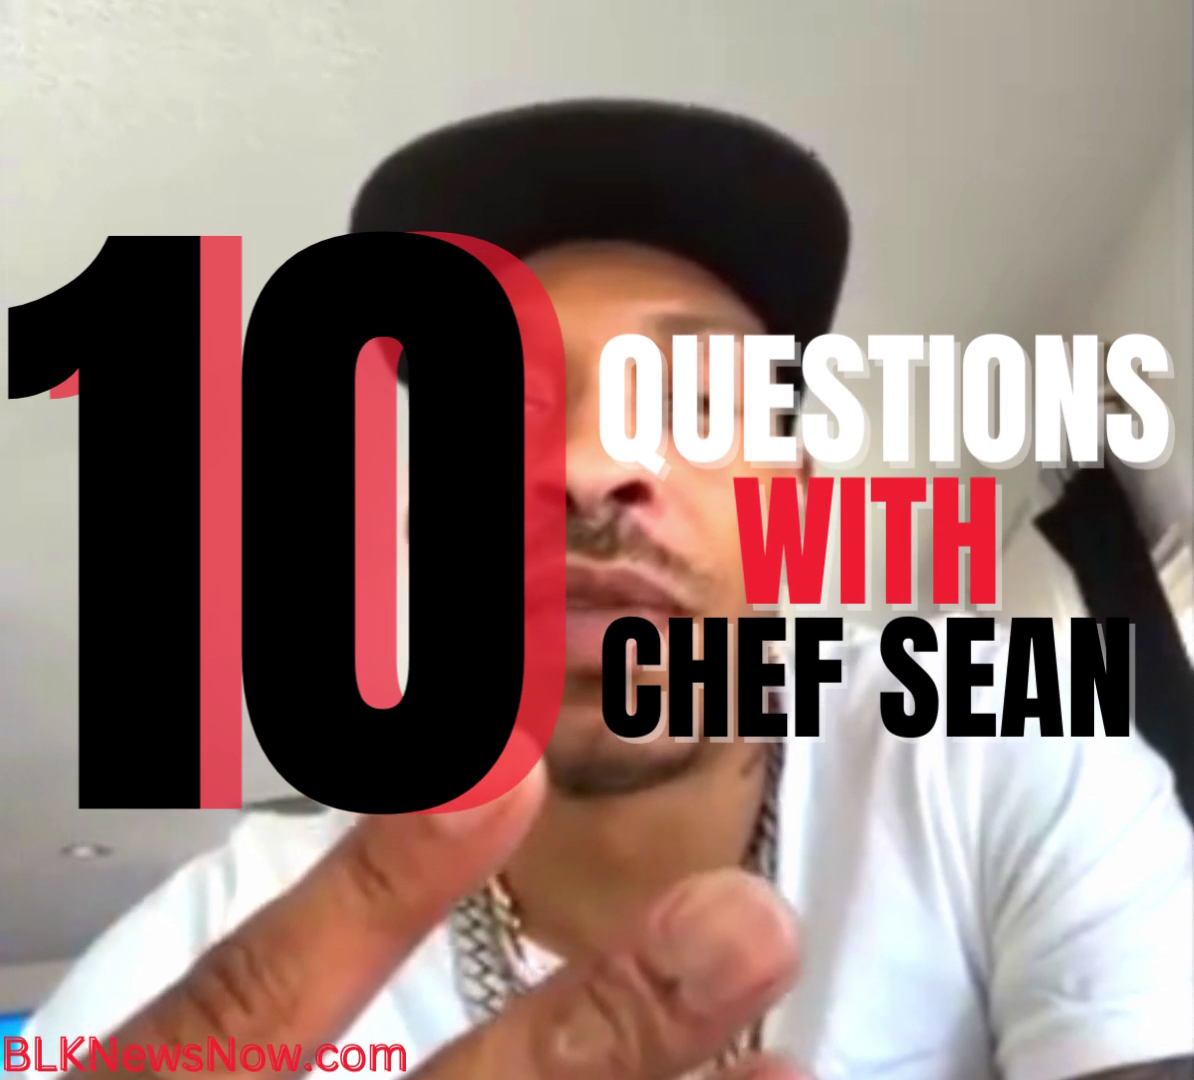 Rapper Chef Sean: Hip Hop Music 50th Anniversary Interview on his GRAMMY Award ambitions, the rap industry, and more